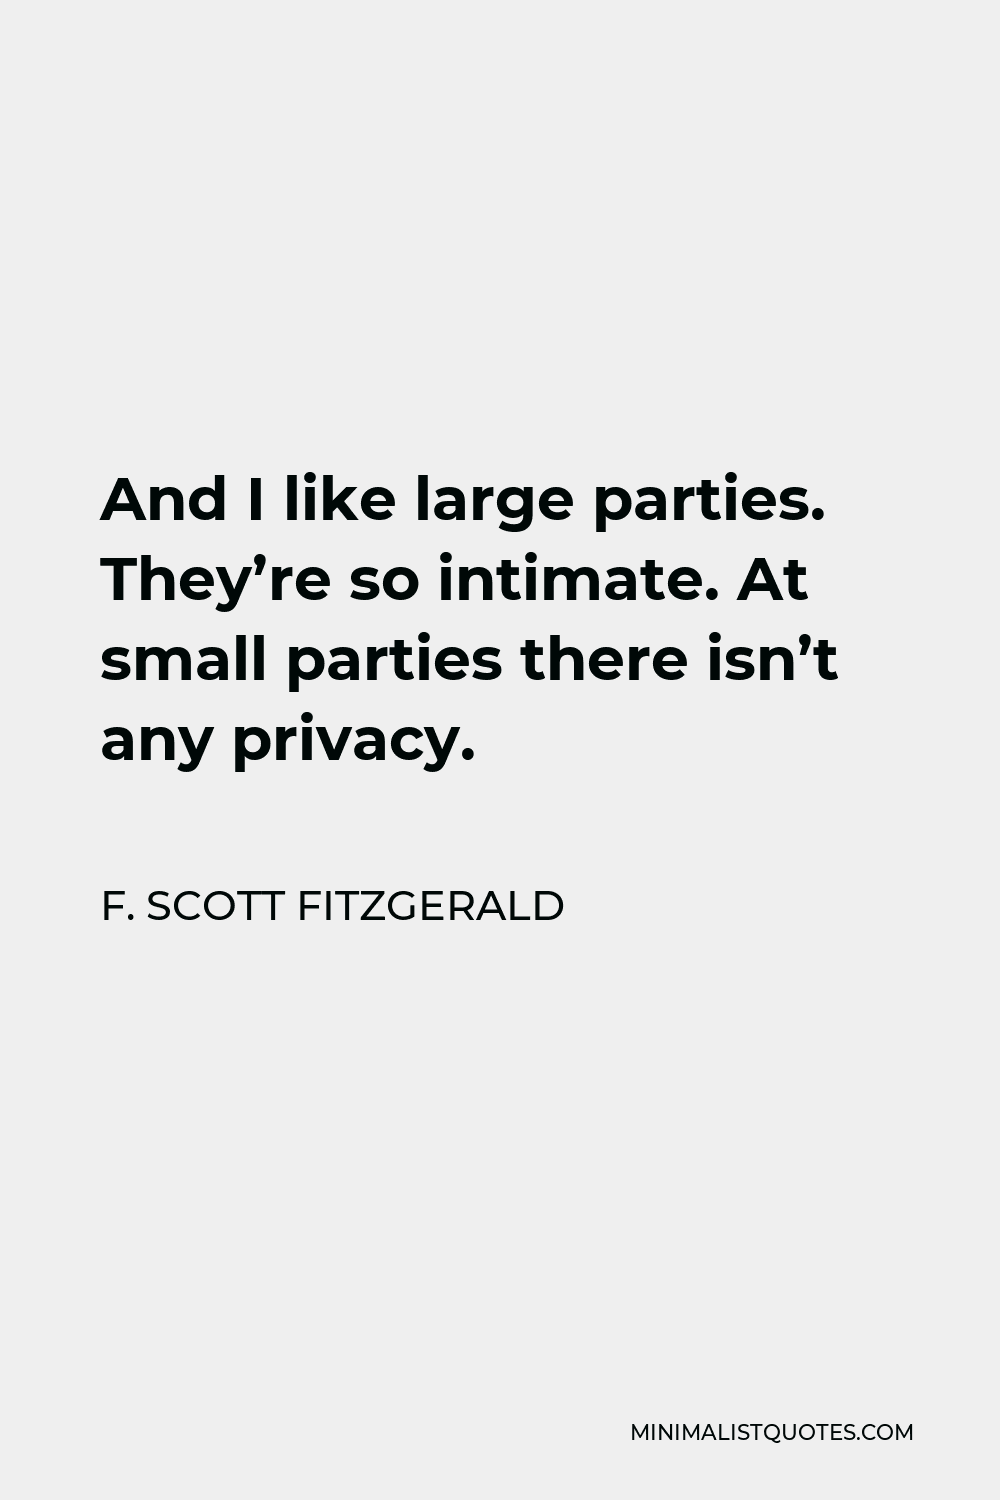 F. Scott Fitzgerald Quote - And I like large parties. They’re so intimate. At small parties there isn’t any privacy.